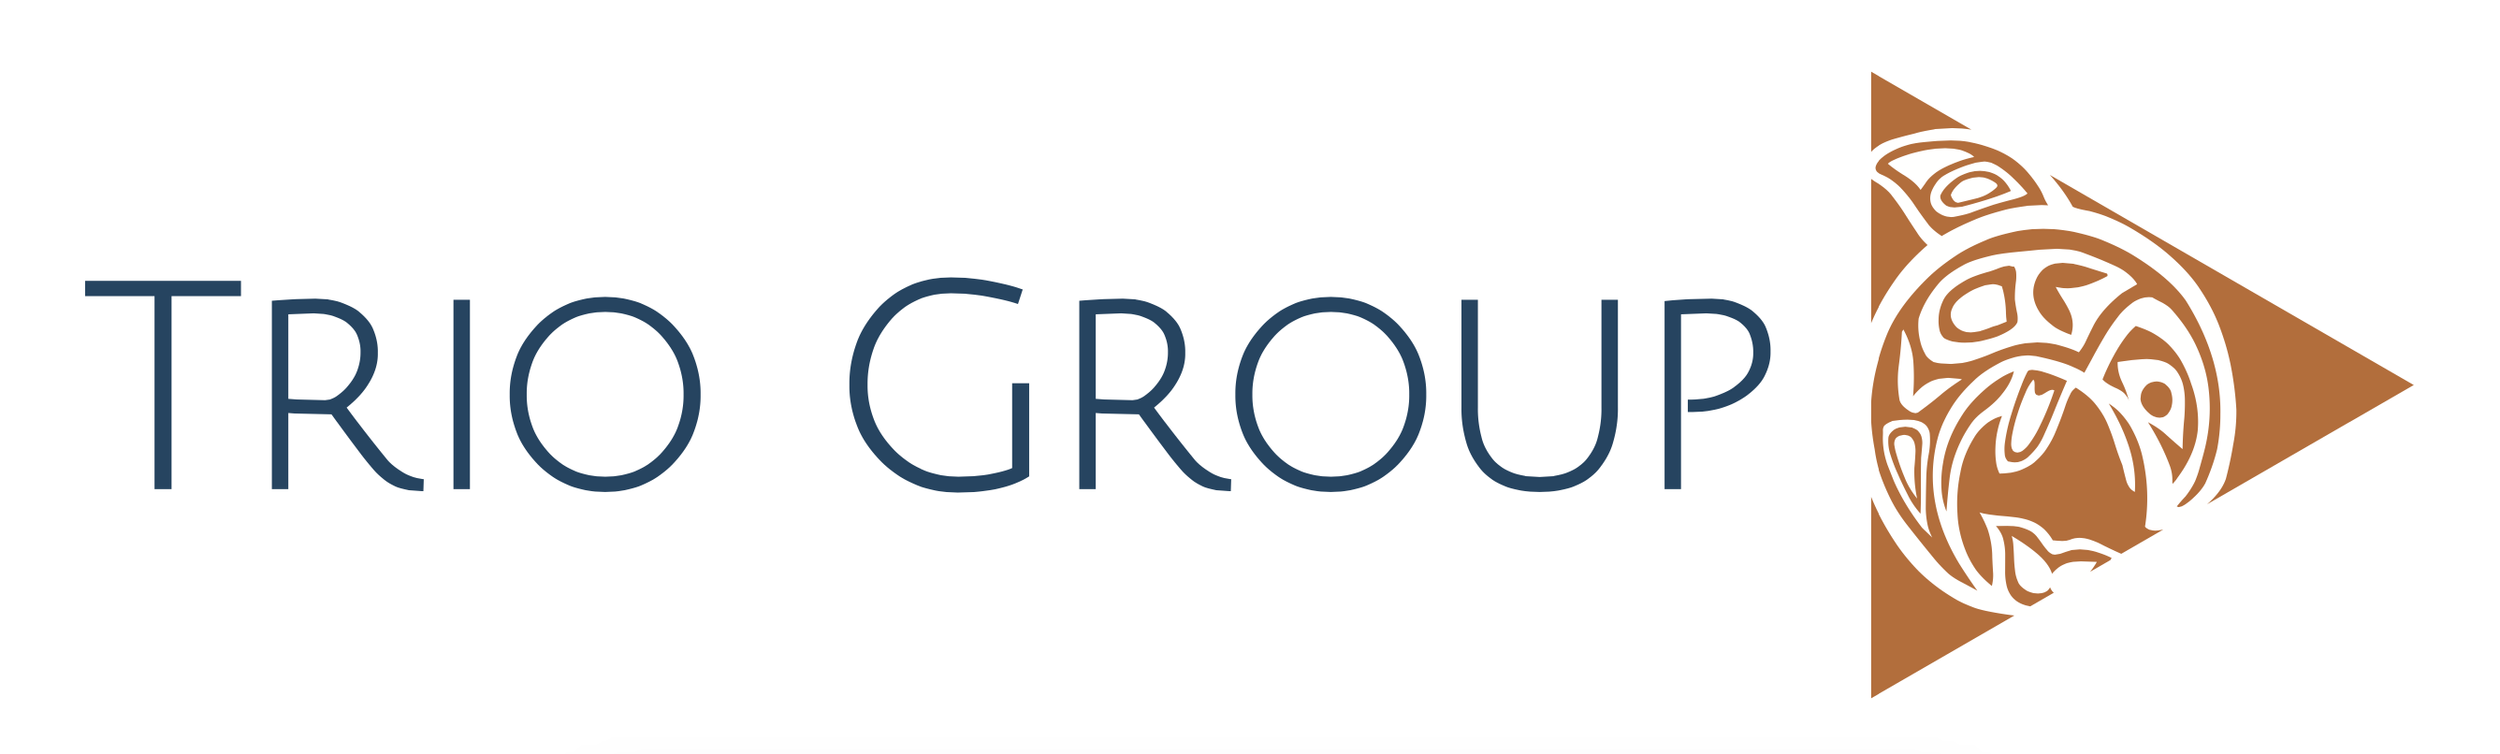 Trio Group Logo.png